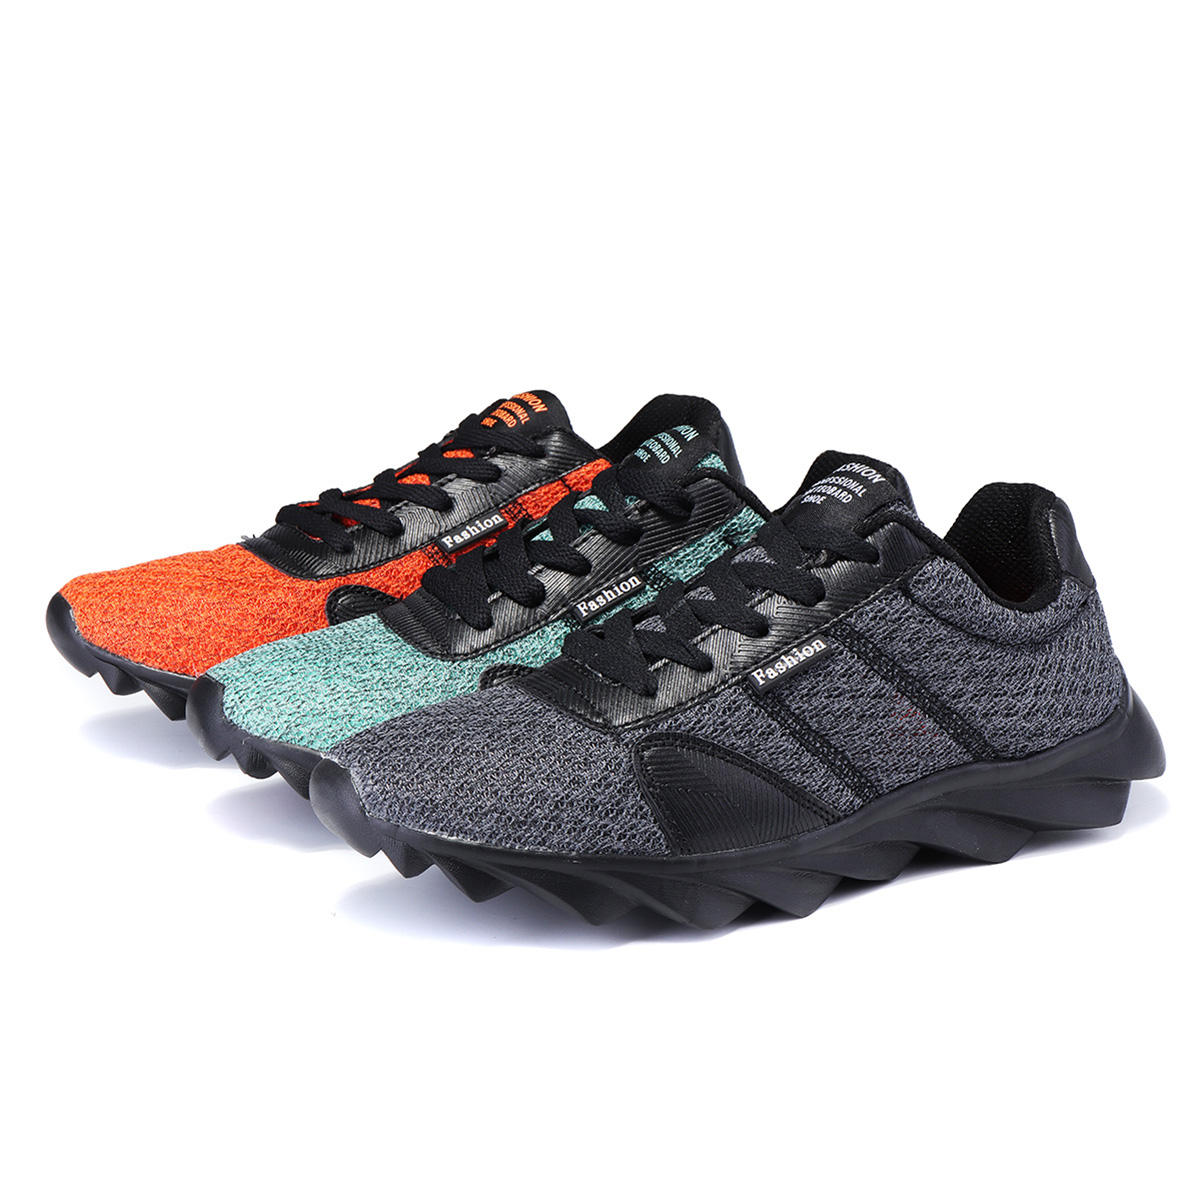 Men's Running Shoes Sneakers Canvas Breathable Ultralight Exercise Shoes Fashion Running Shoes